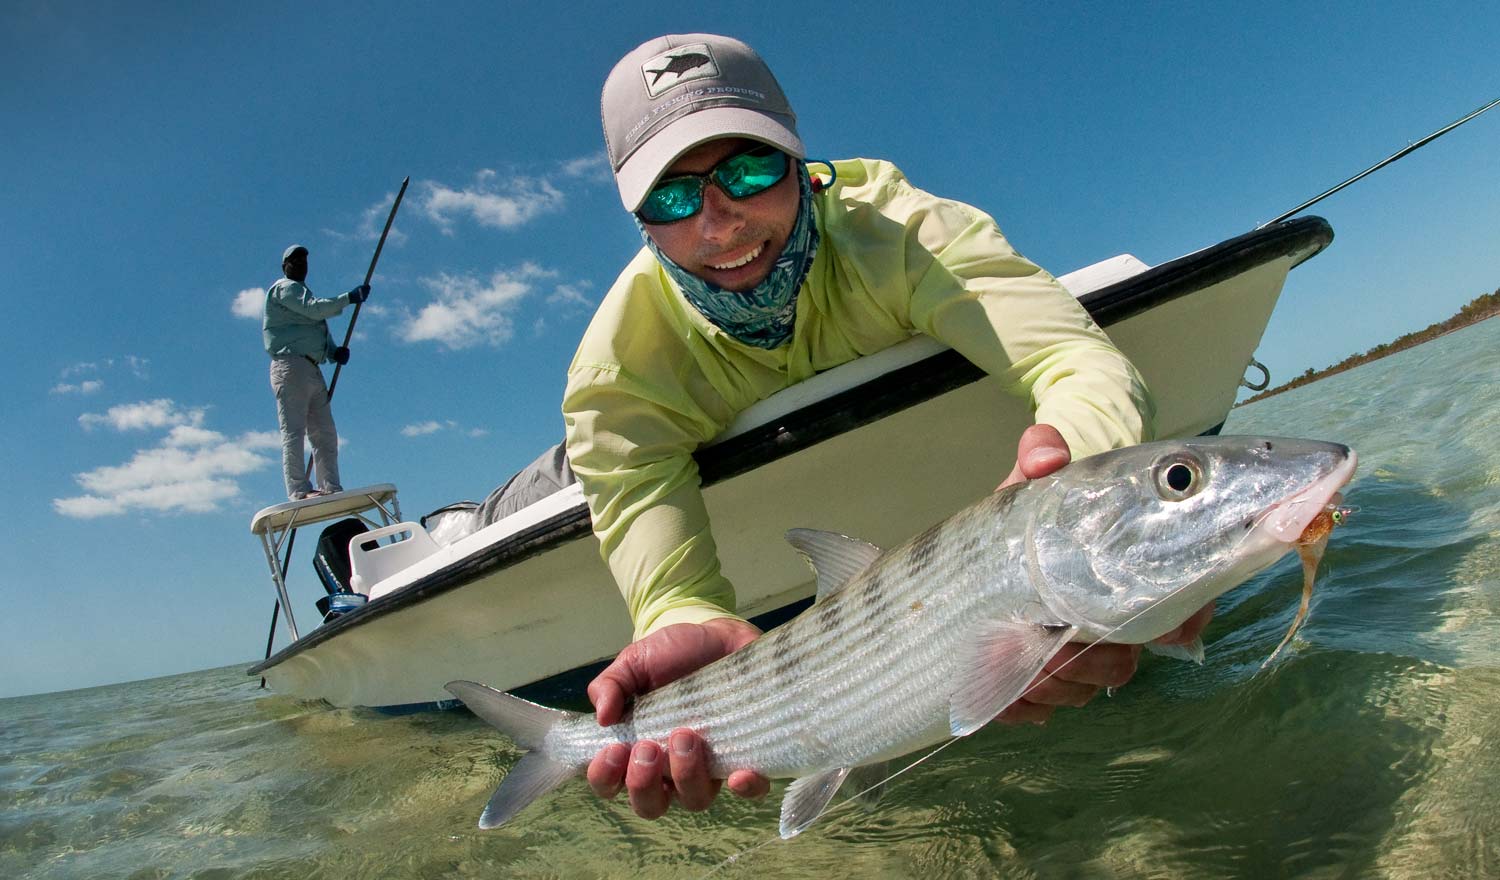 My Experience At The G&G Bonefish School - Fly Fishing, Gink and Gasoline, How to Fly Fish, Trout Fishing, Fly Tying